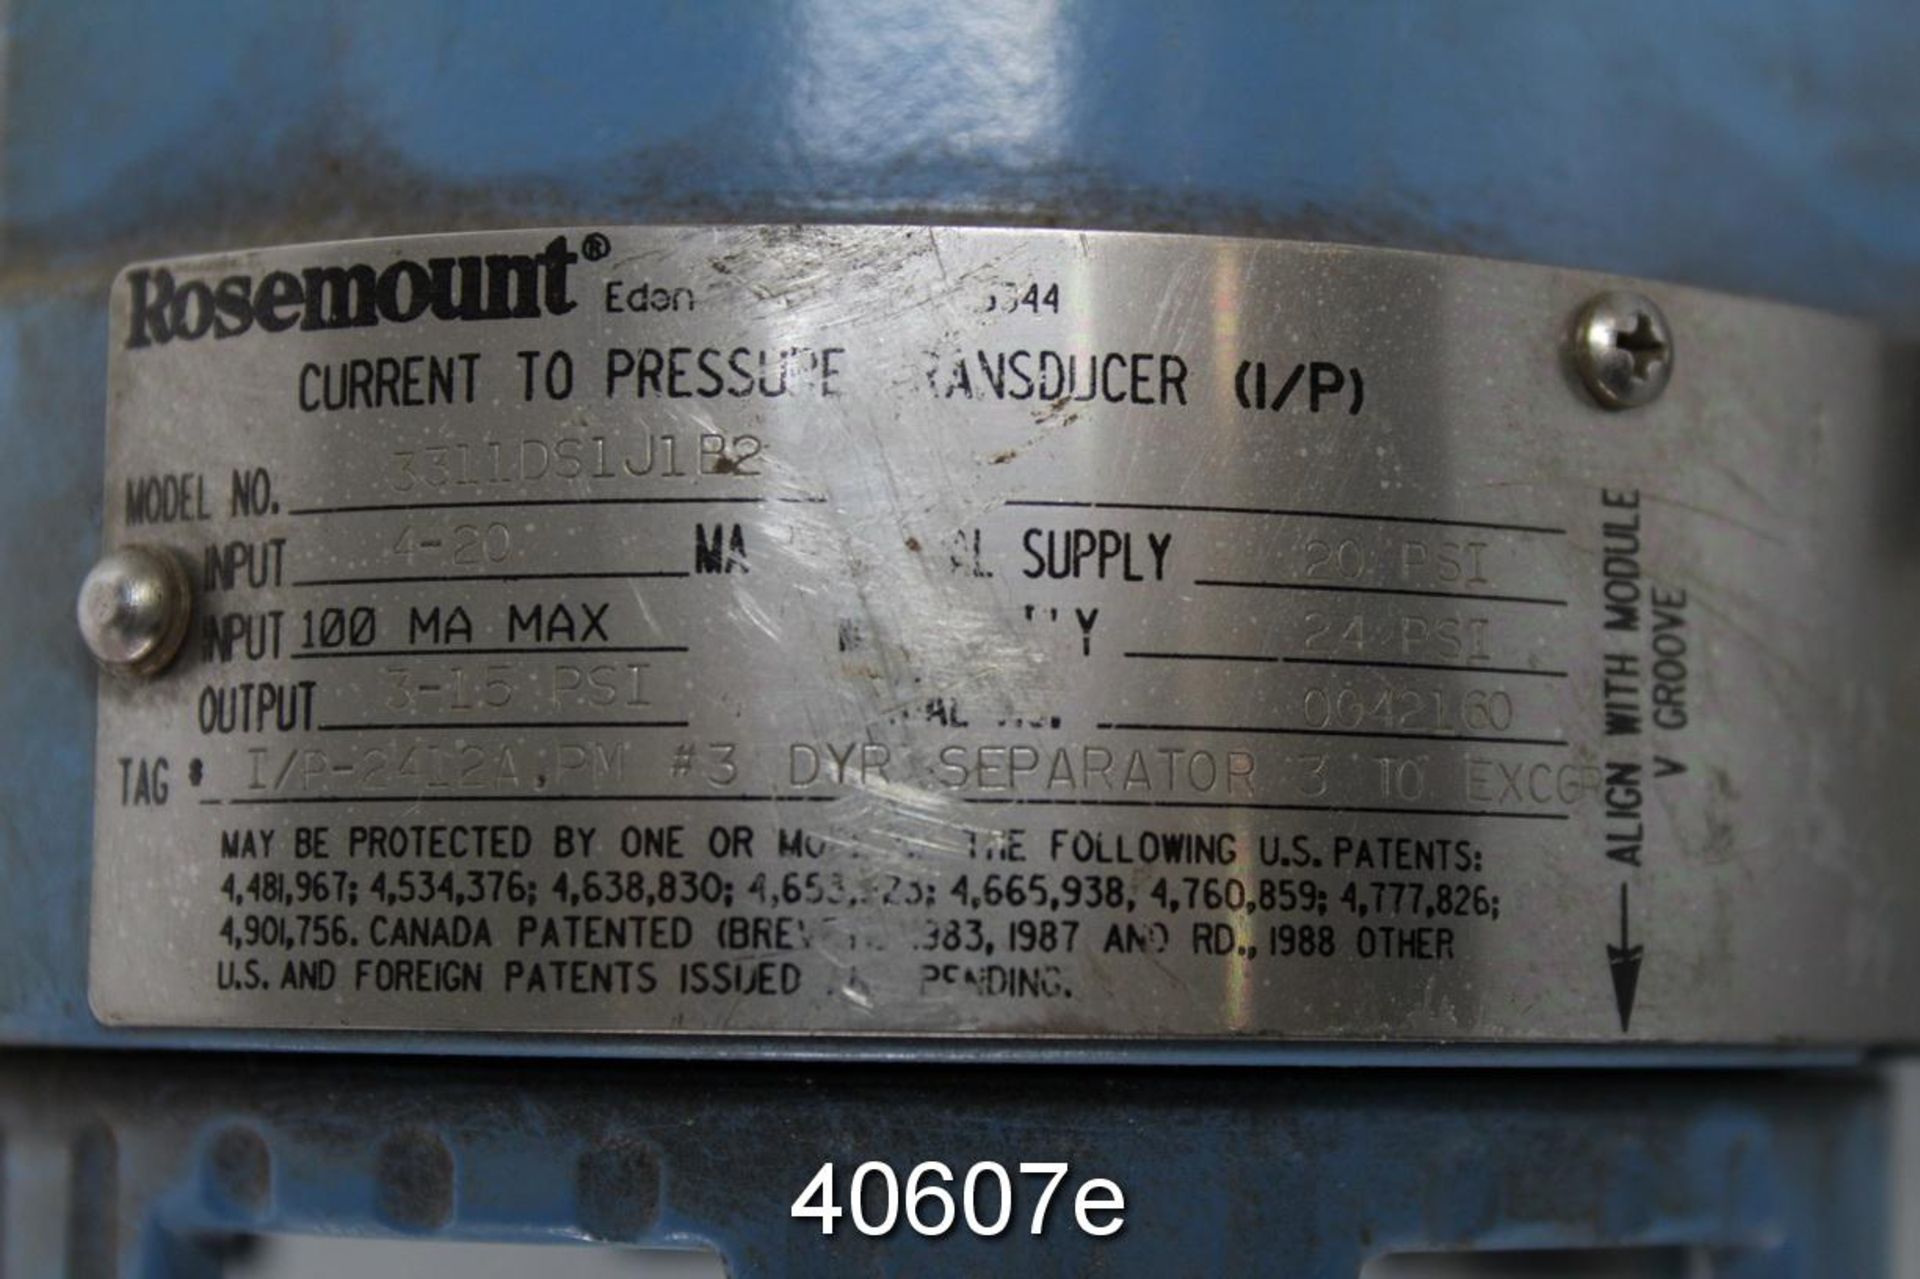 Rosemount 3311DS1J1B2 Current To Pressure Transducer, Model 3311ds1j1b2, Normal Supply 20 Psi, Max - Image 5 of 5